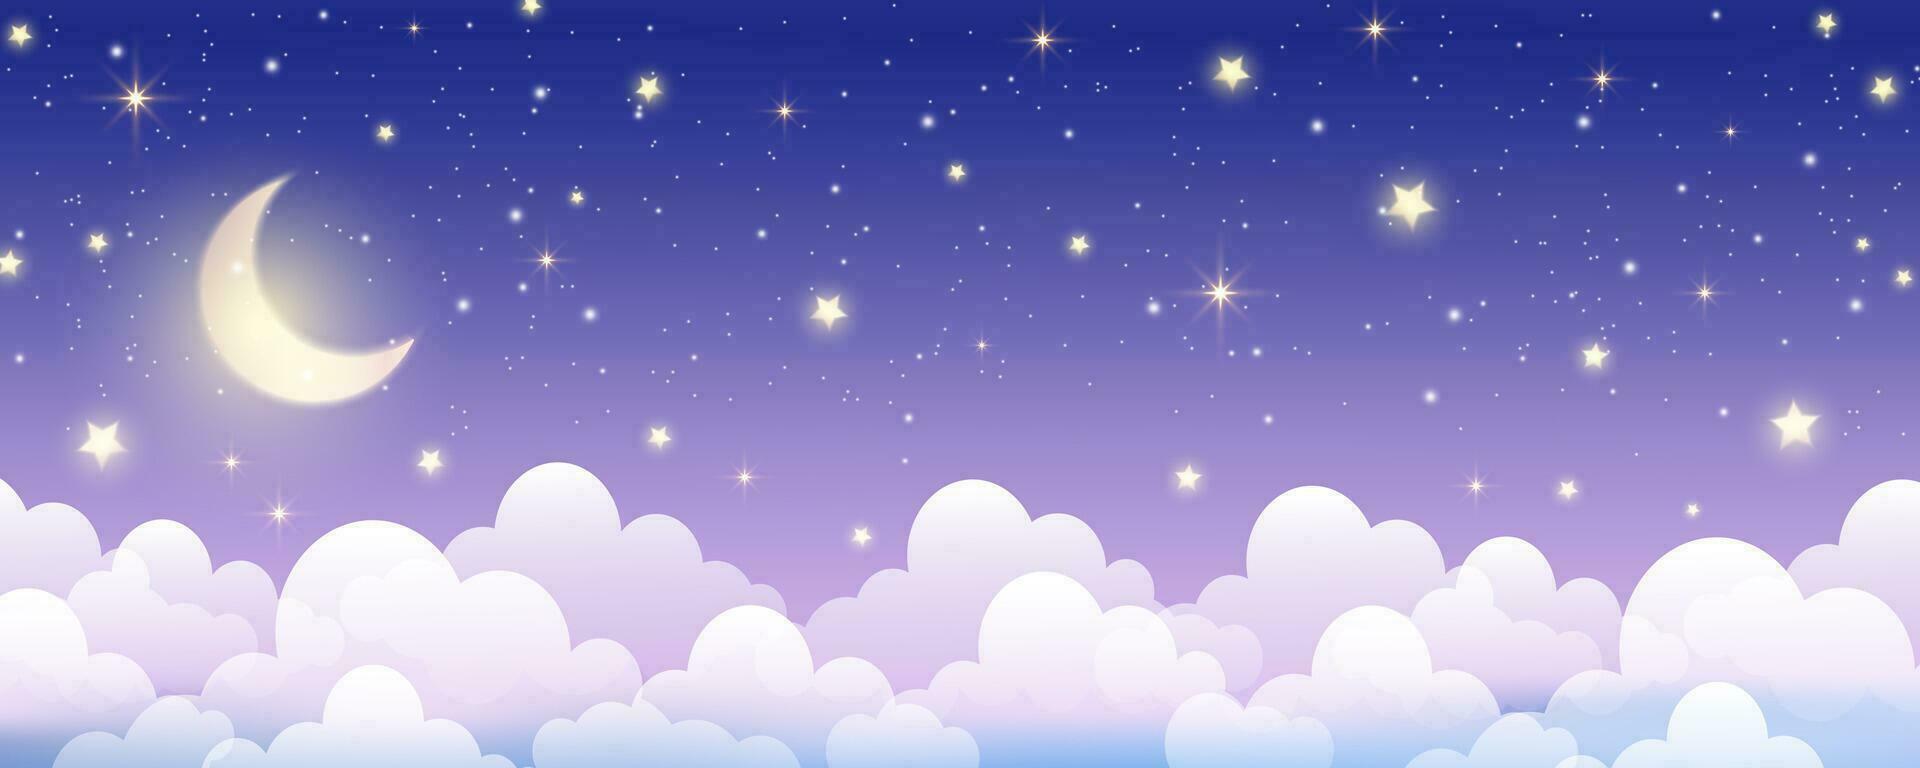 Night sky background. Starry dark gradient space. Crescent moon and clouds dreamy scene. Vector cute landscape panorama. Magic midnight illustration